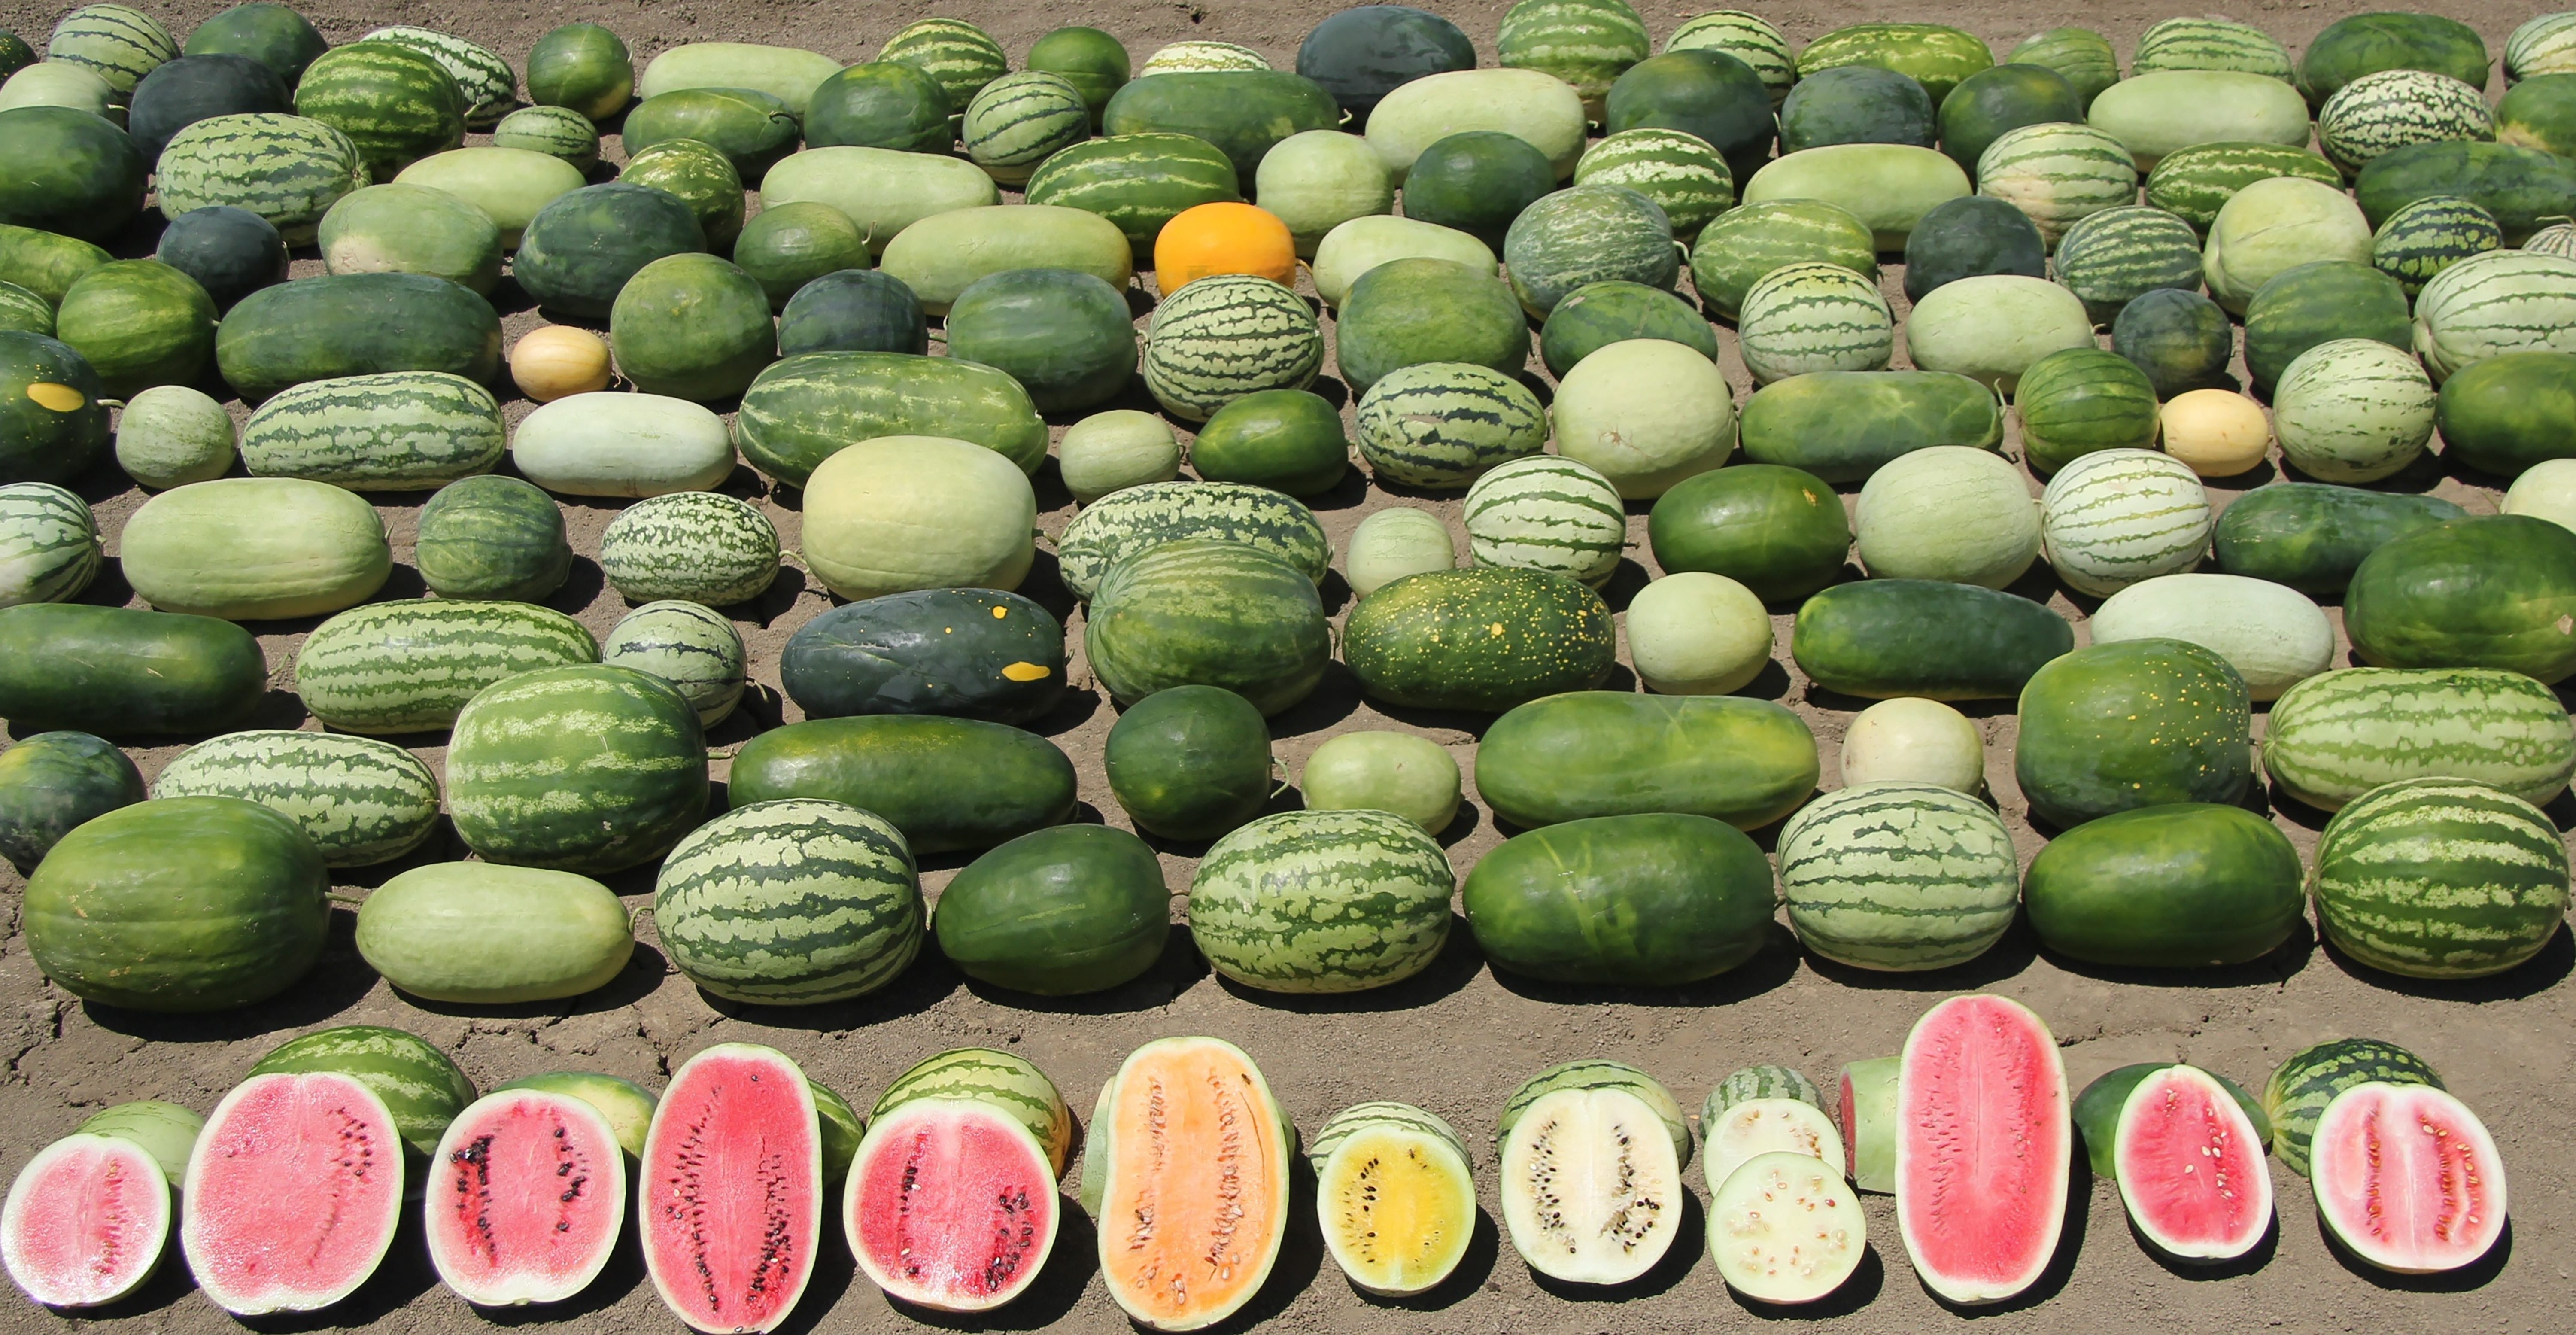 Creating a resource that captures the genetic diversity of watermelons can help plant breeders improve the domestic fruit. Image credit: Xingping Zhang/Syngenta